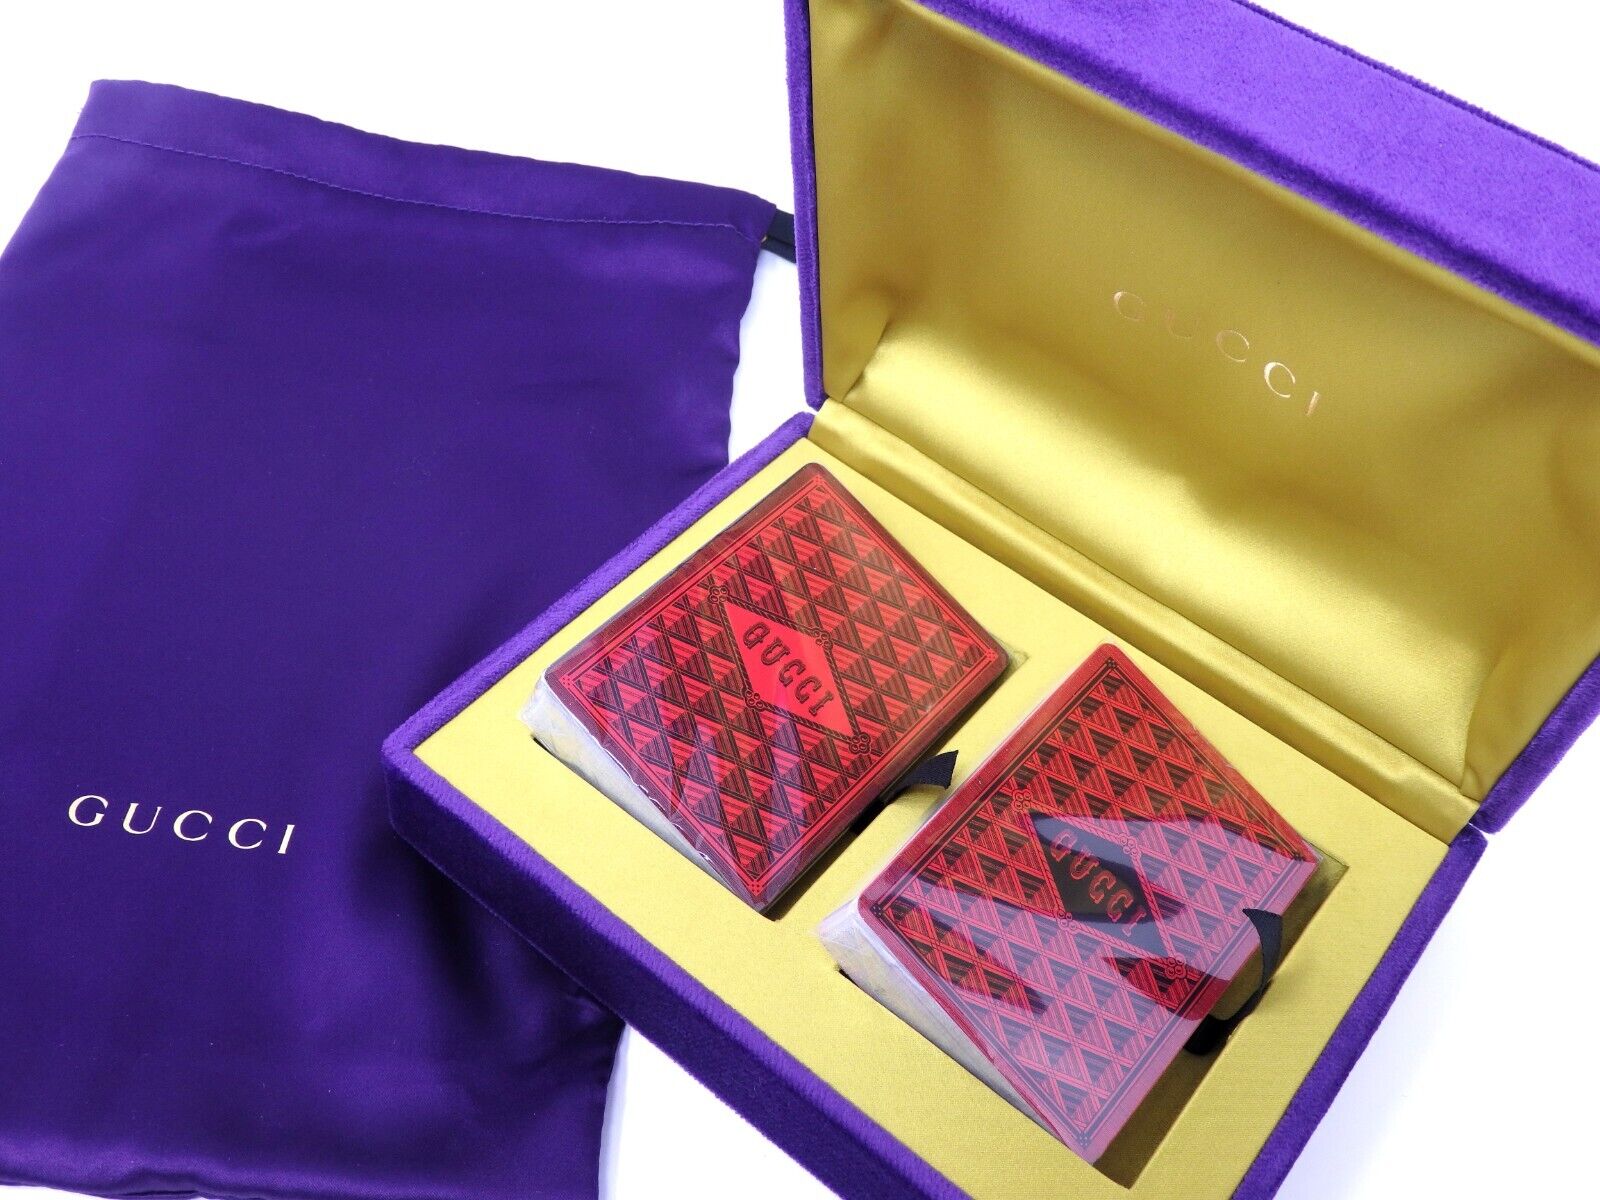 GUCCI 2 Deck Playing Cards Trump Game Auth with Purple Luxury Box Drawstring Bag